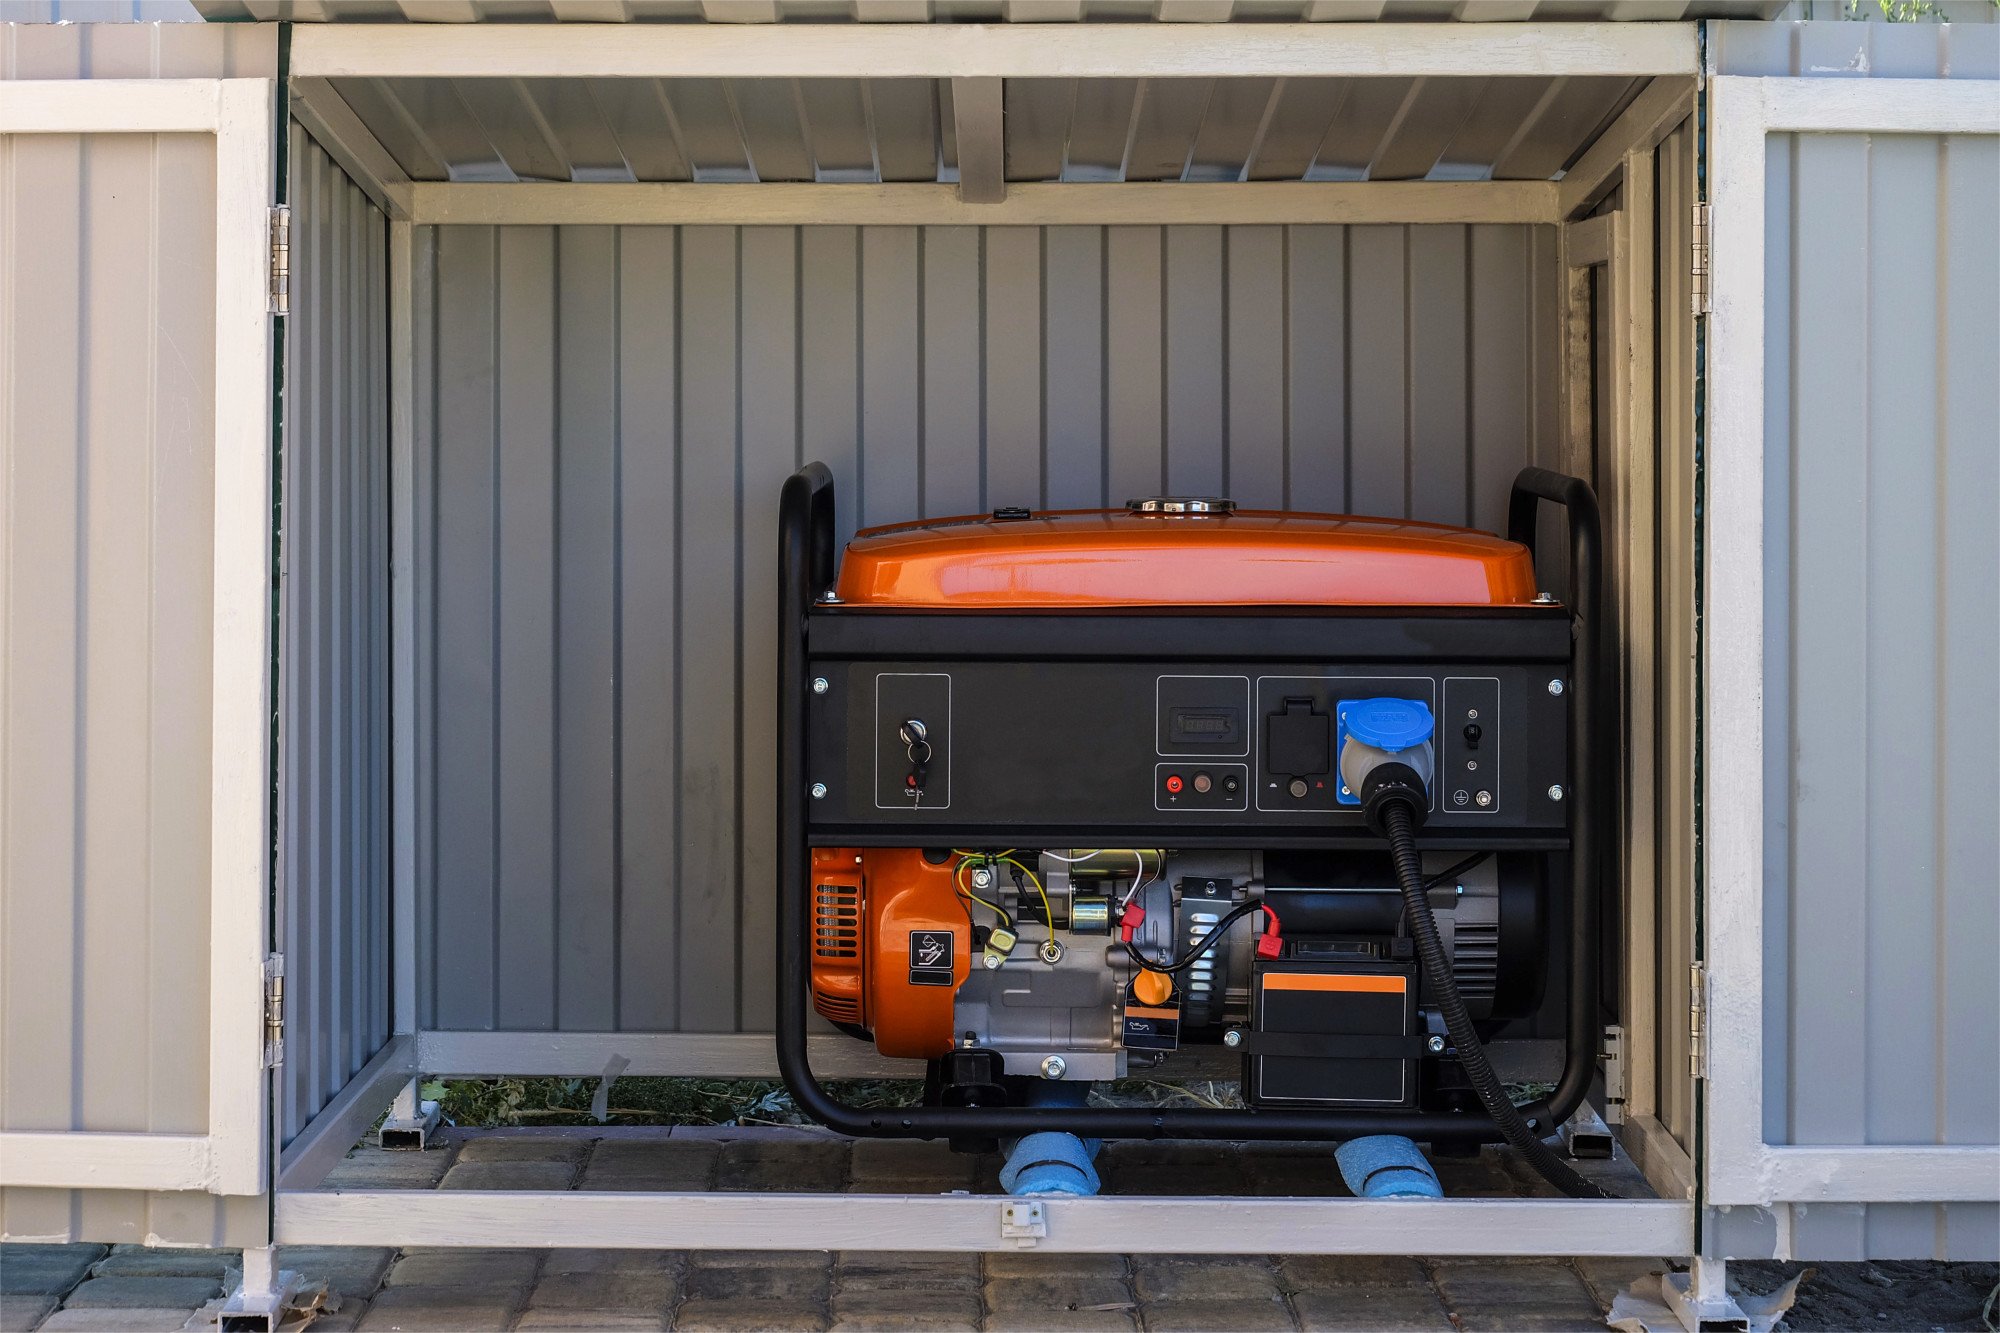 Image of an orange, electrical generator tucked away in a grey shed.